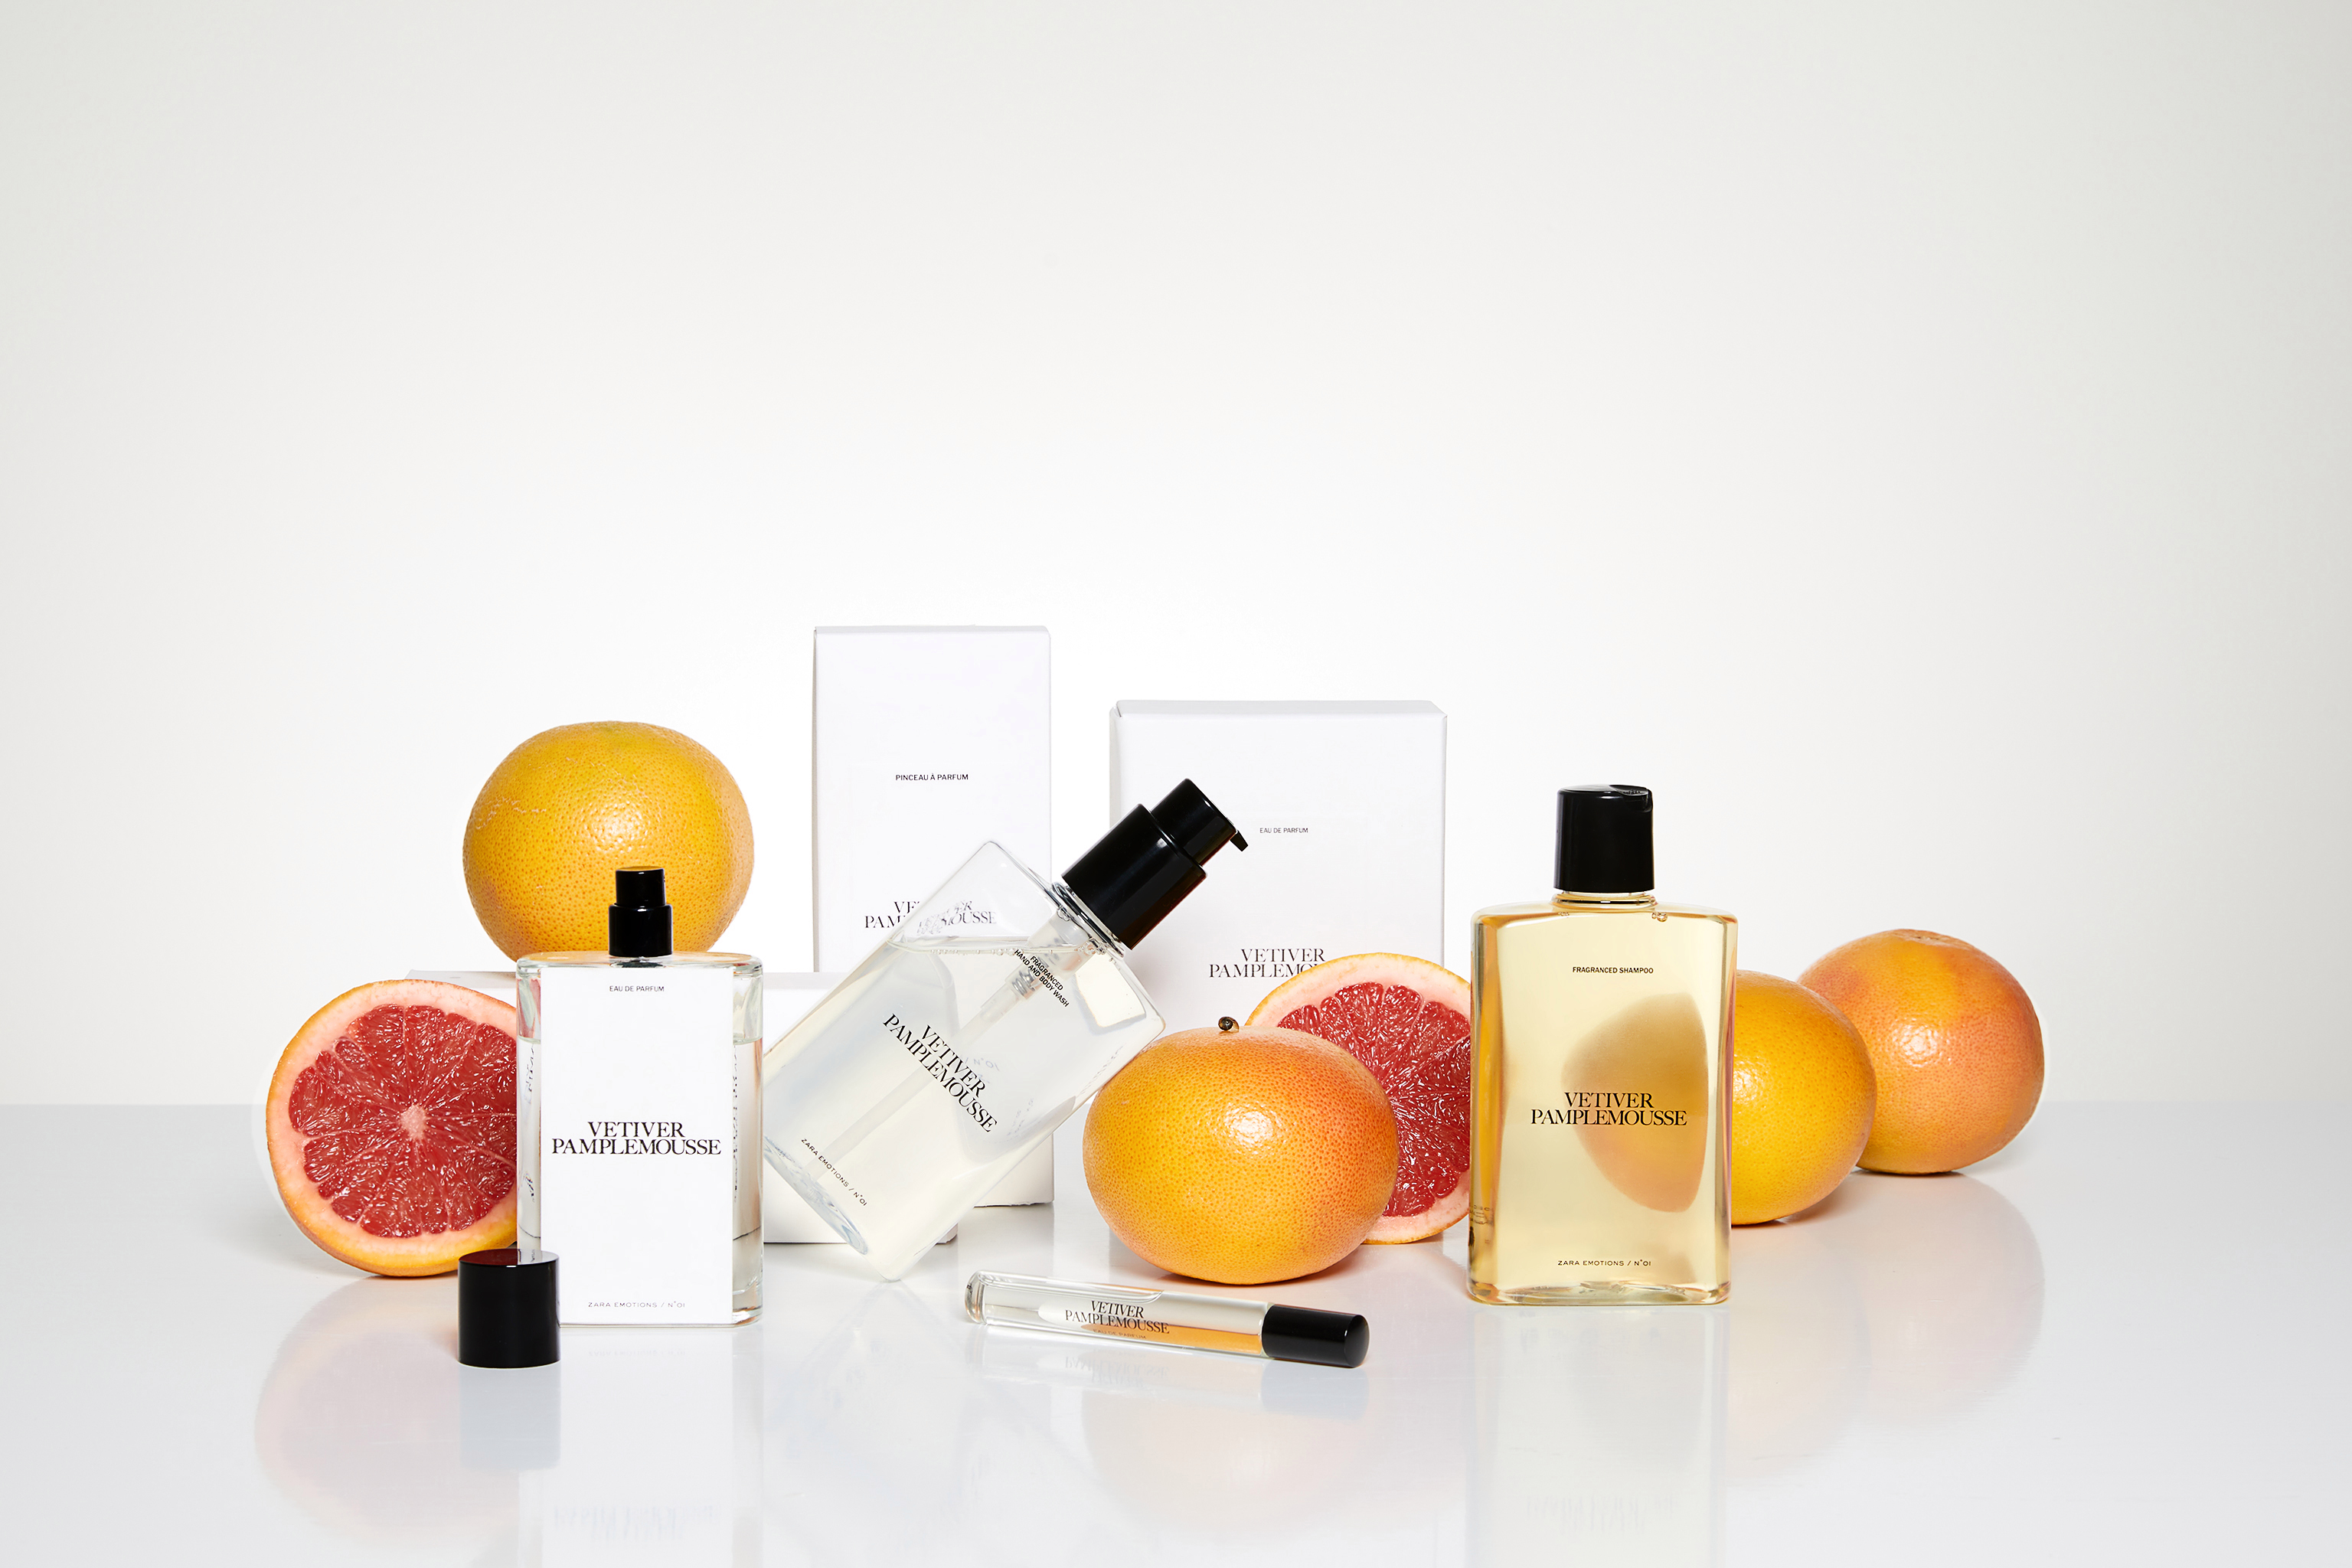 The Zara Emotions Collection by Jo Loves, created by the perfumer Jo Malone.